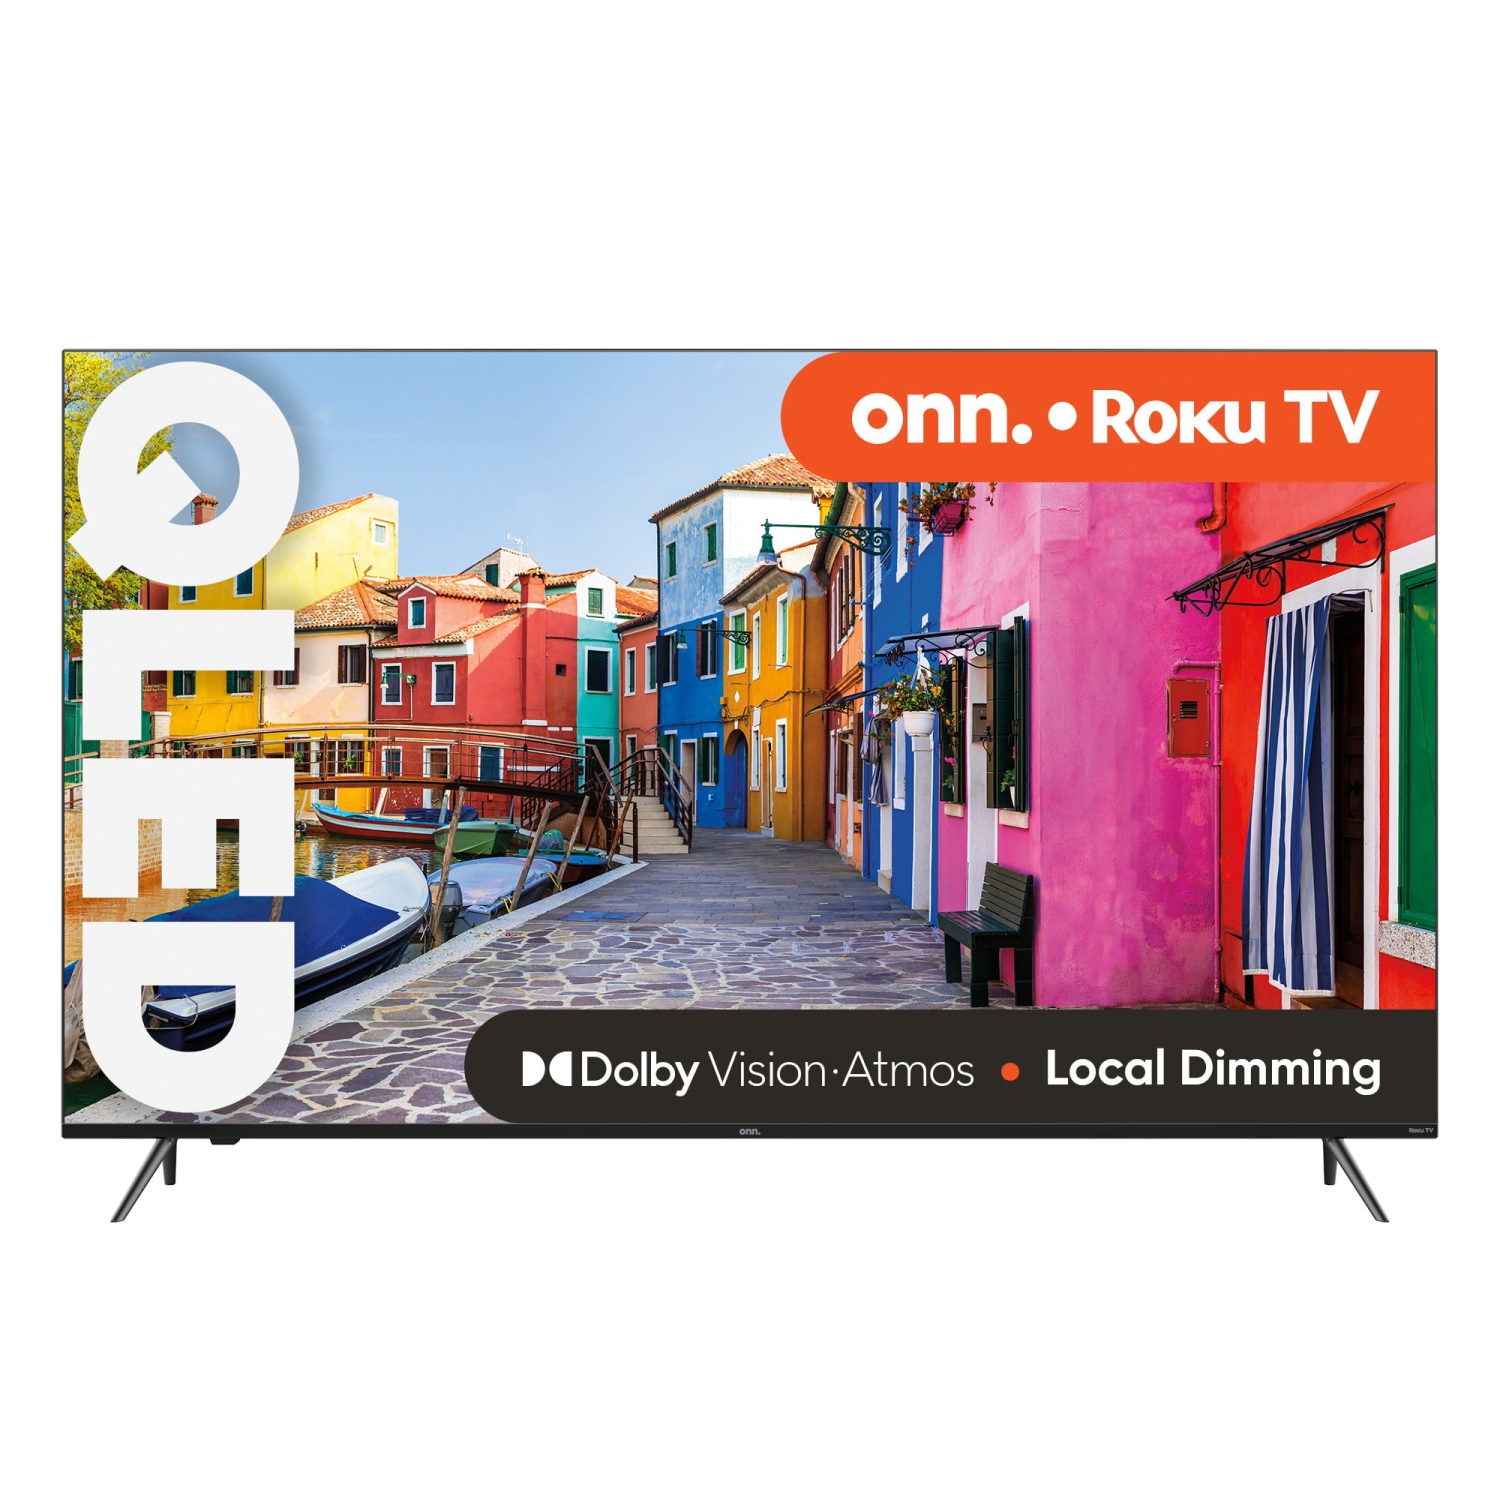 Refurbished (Good) onn. 70” QLED 4K UHD (2160p) Roku Smart TV with Dolby Atmos, Dolby Vision, Local Dimming, 120hz Effective Refresh Rate, and HDR (100071708)